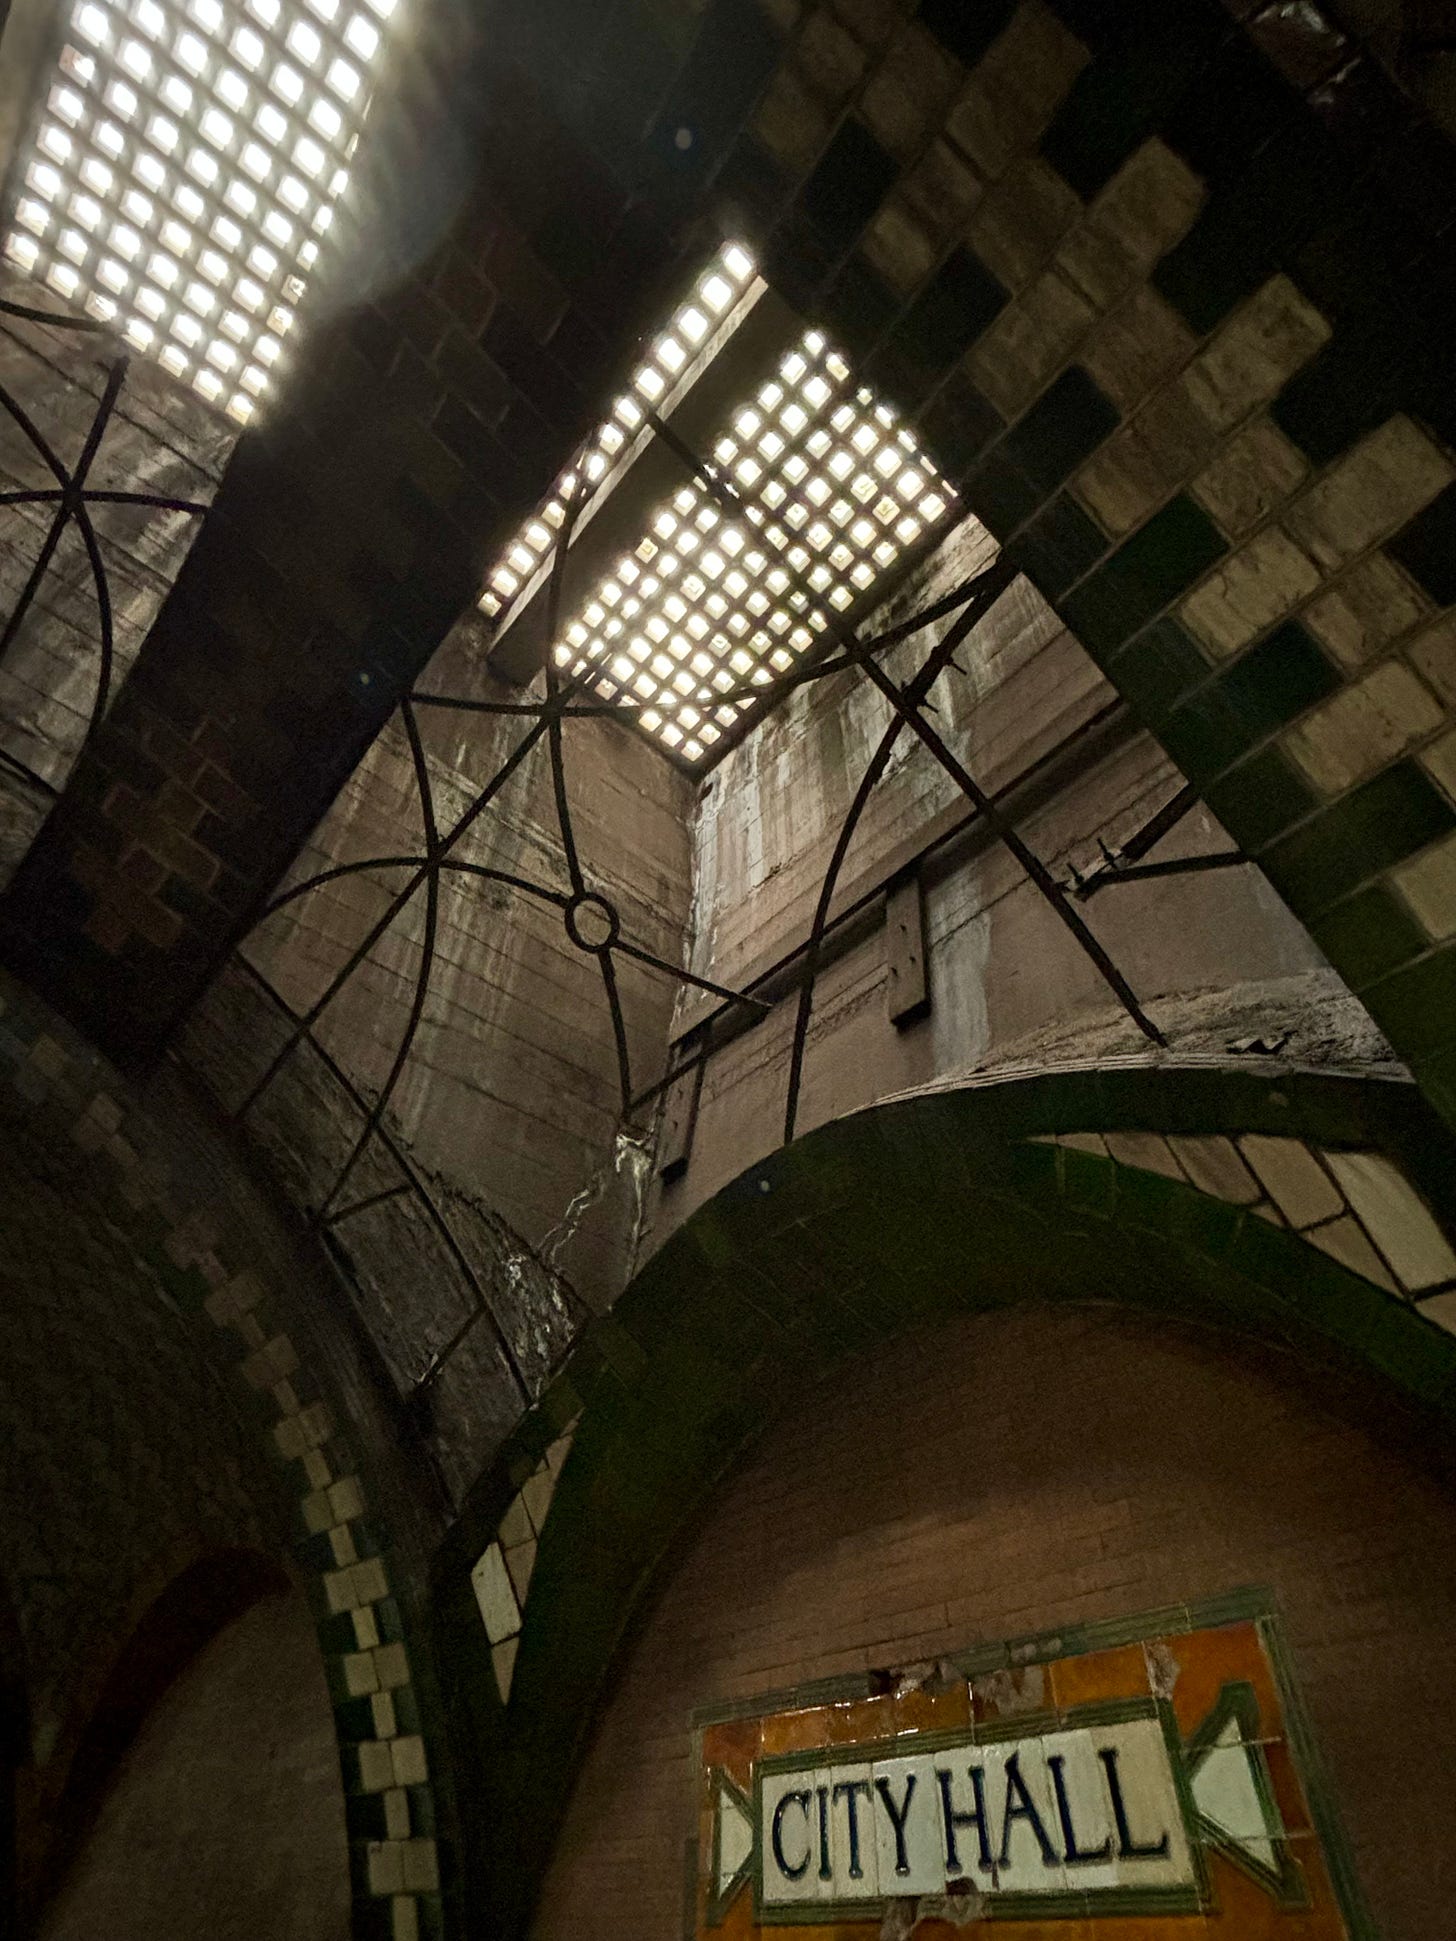 The wall of a disused subway station labeled City Hall. Above it is an arched ceiling with a skylight. There has been decorative metal sculpted into an intricate design but most of the metal is gone now.